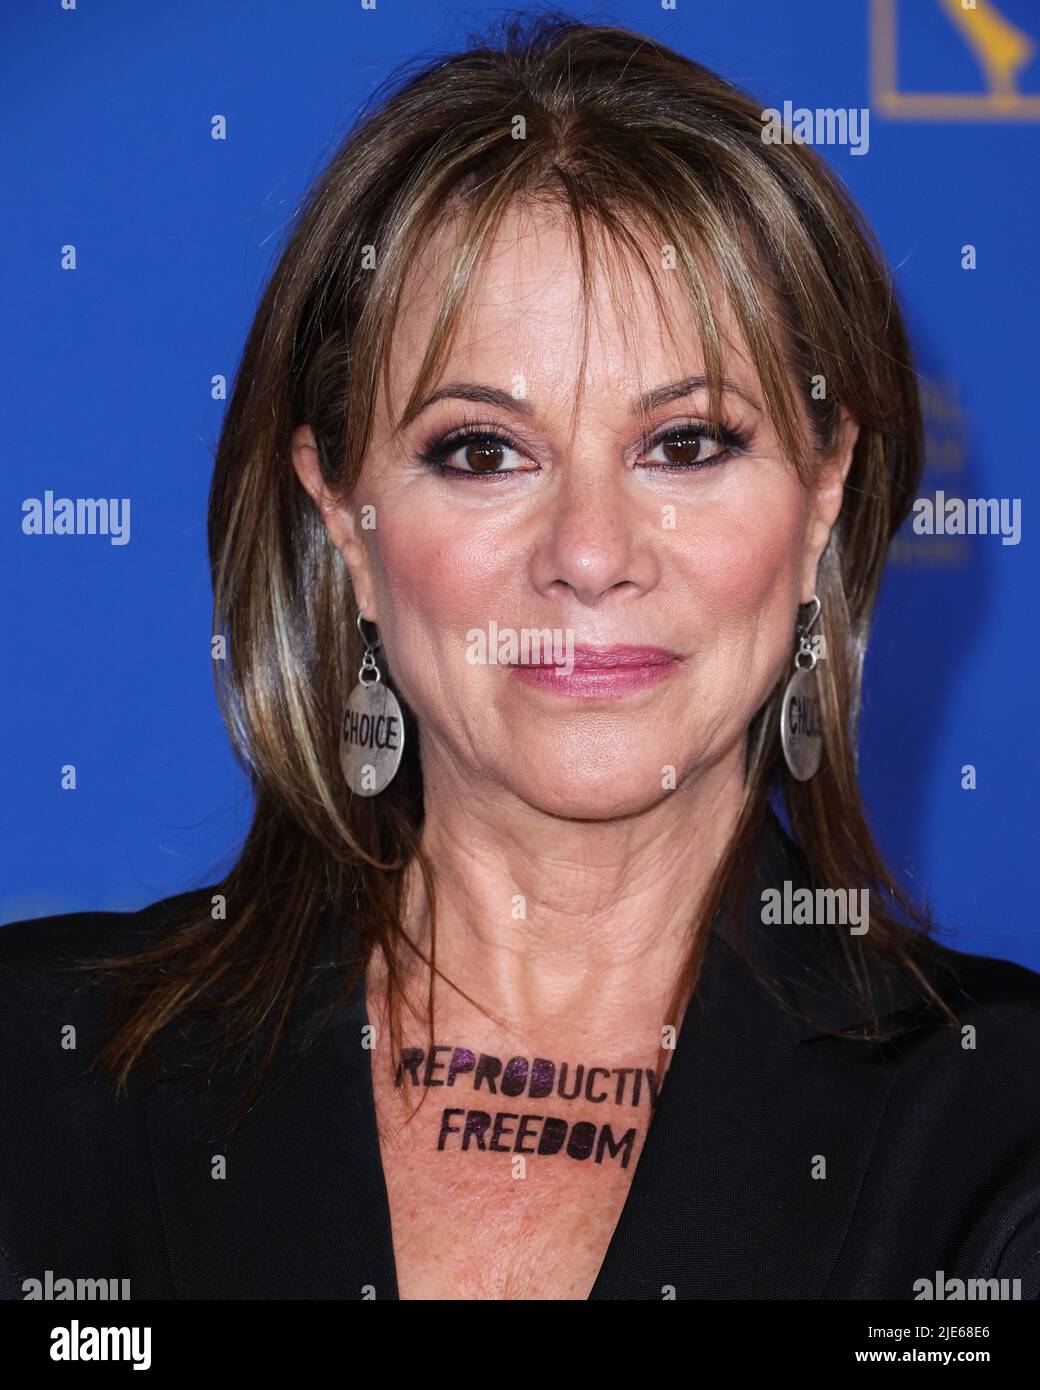 PASADENA, LOS ANGELES, CALIFORNIA, USA - JUNE 24: Nancy Lee Grahn arrives at the 49th Daytime Emmy Awards held at the Pasadena Convention Center on June 24, 2022 in Pasadena, Los Angeles, California, United States. (Photo by Xavier Collin/Image Press Agency) Stock Photo